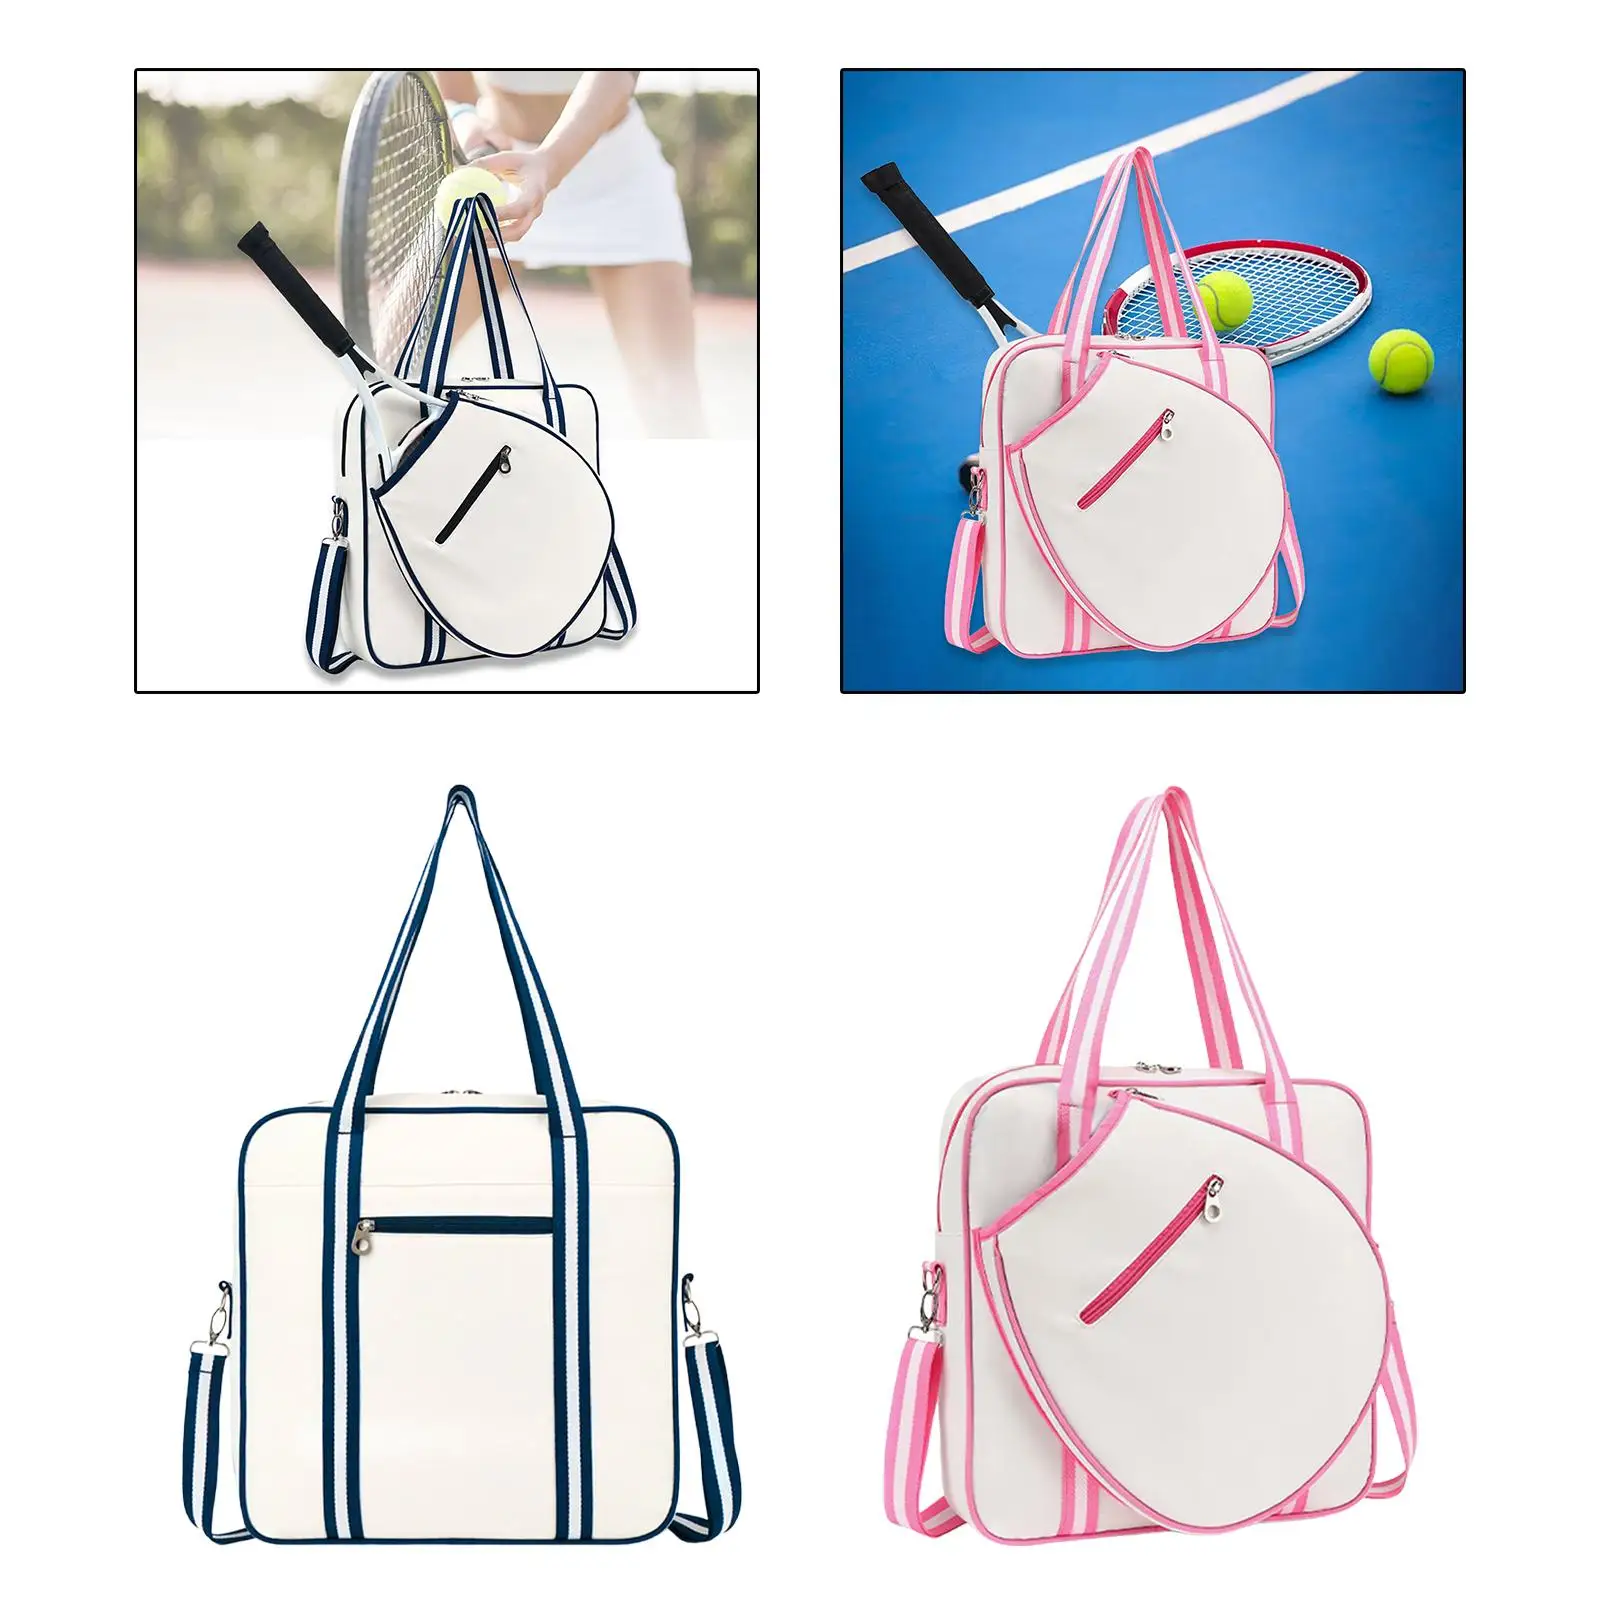 Tennis Racket Shoulder Bag Travel Tote Bag Stylish Multifunctional Sturdy 15x4x15inch Water Resistant for Girls, Boys, Teenagers